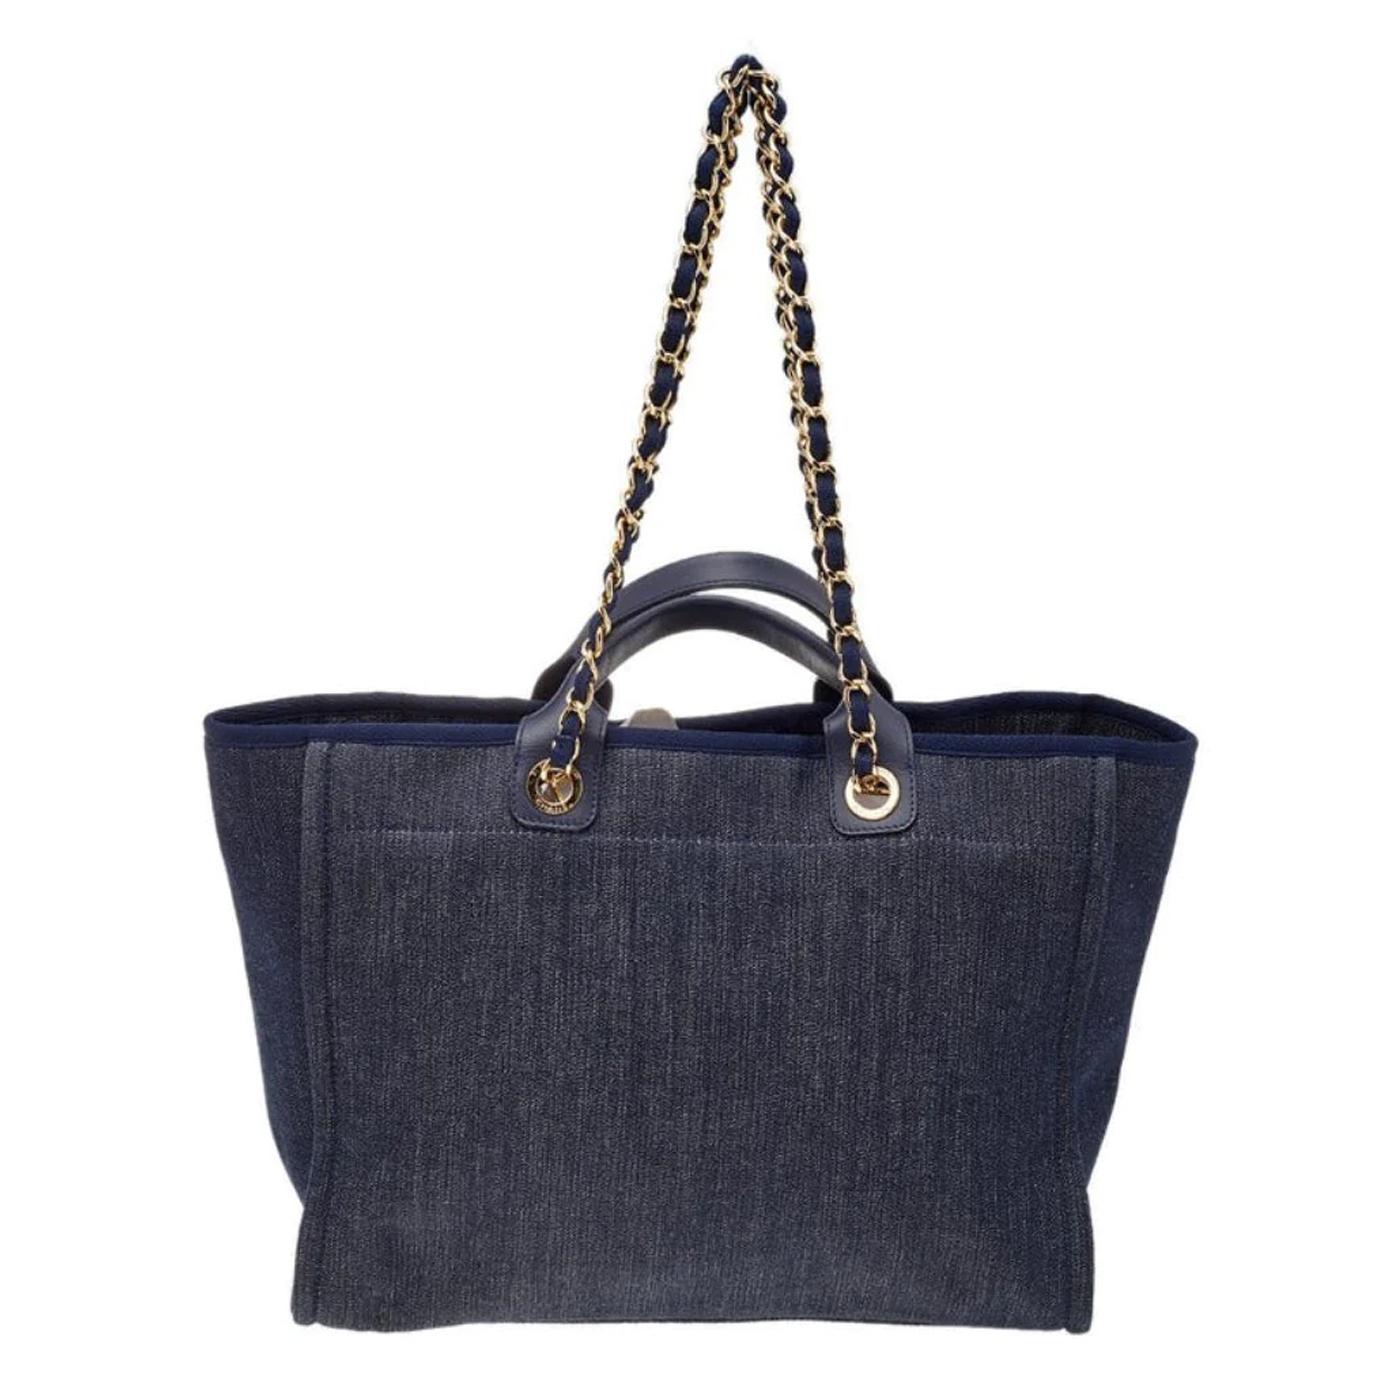 Chanel Navy Blue Denim Large Deauville Shopping Tote Silver Hardware In Good Condition For Sale In Aventura, FL